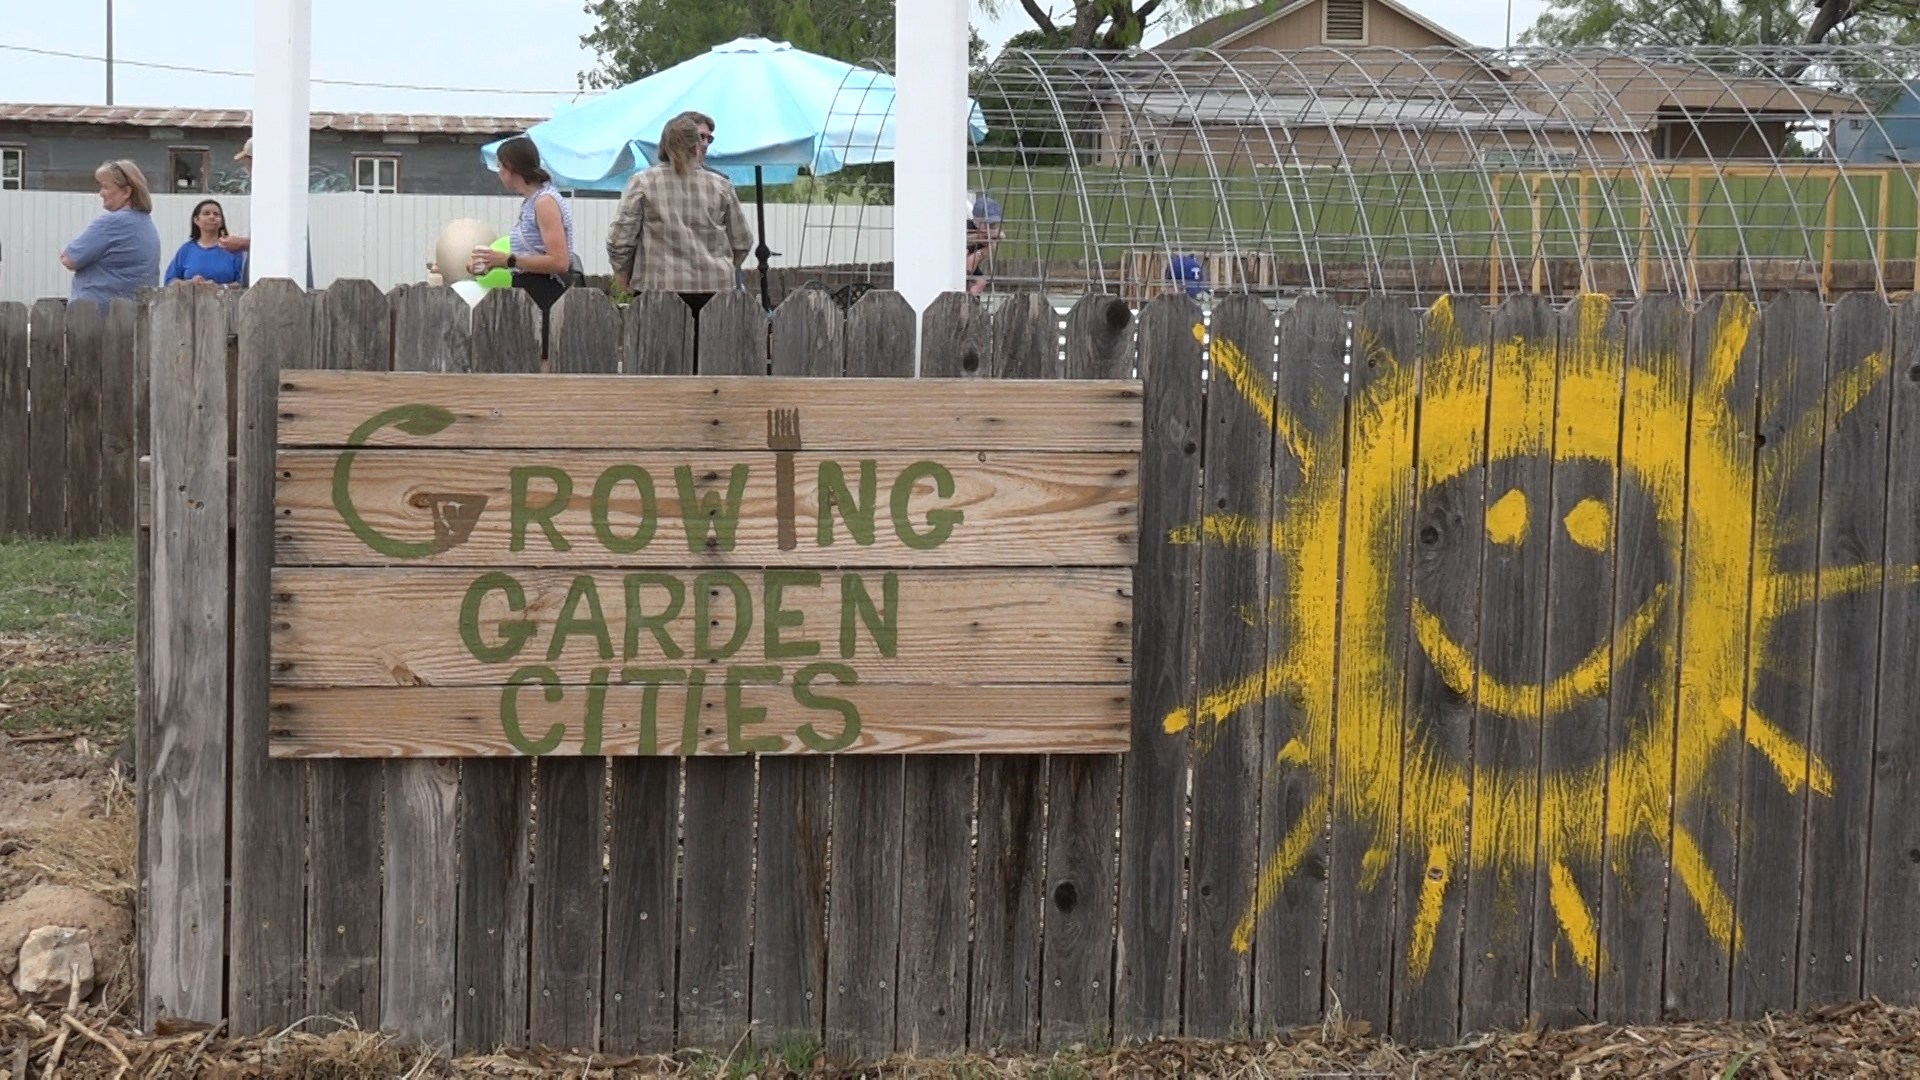 For the past two summers, the San Angelo nonprofit has been providing a place for community growth through gardening.